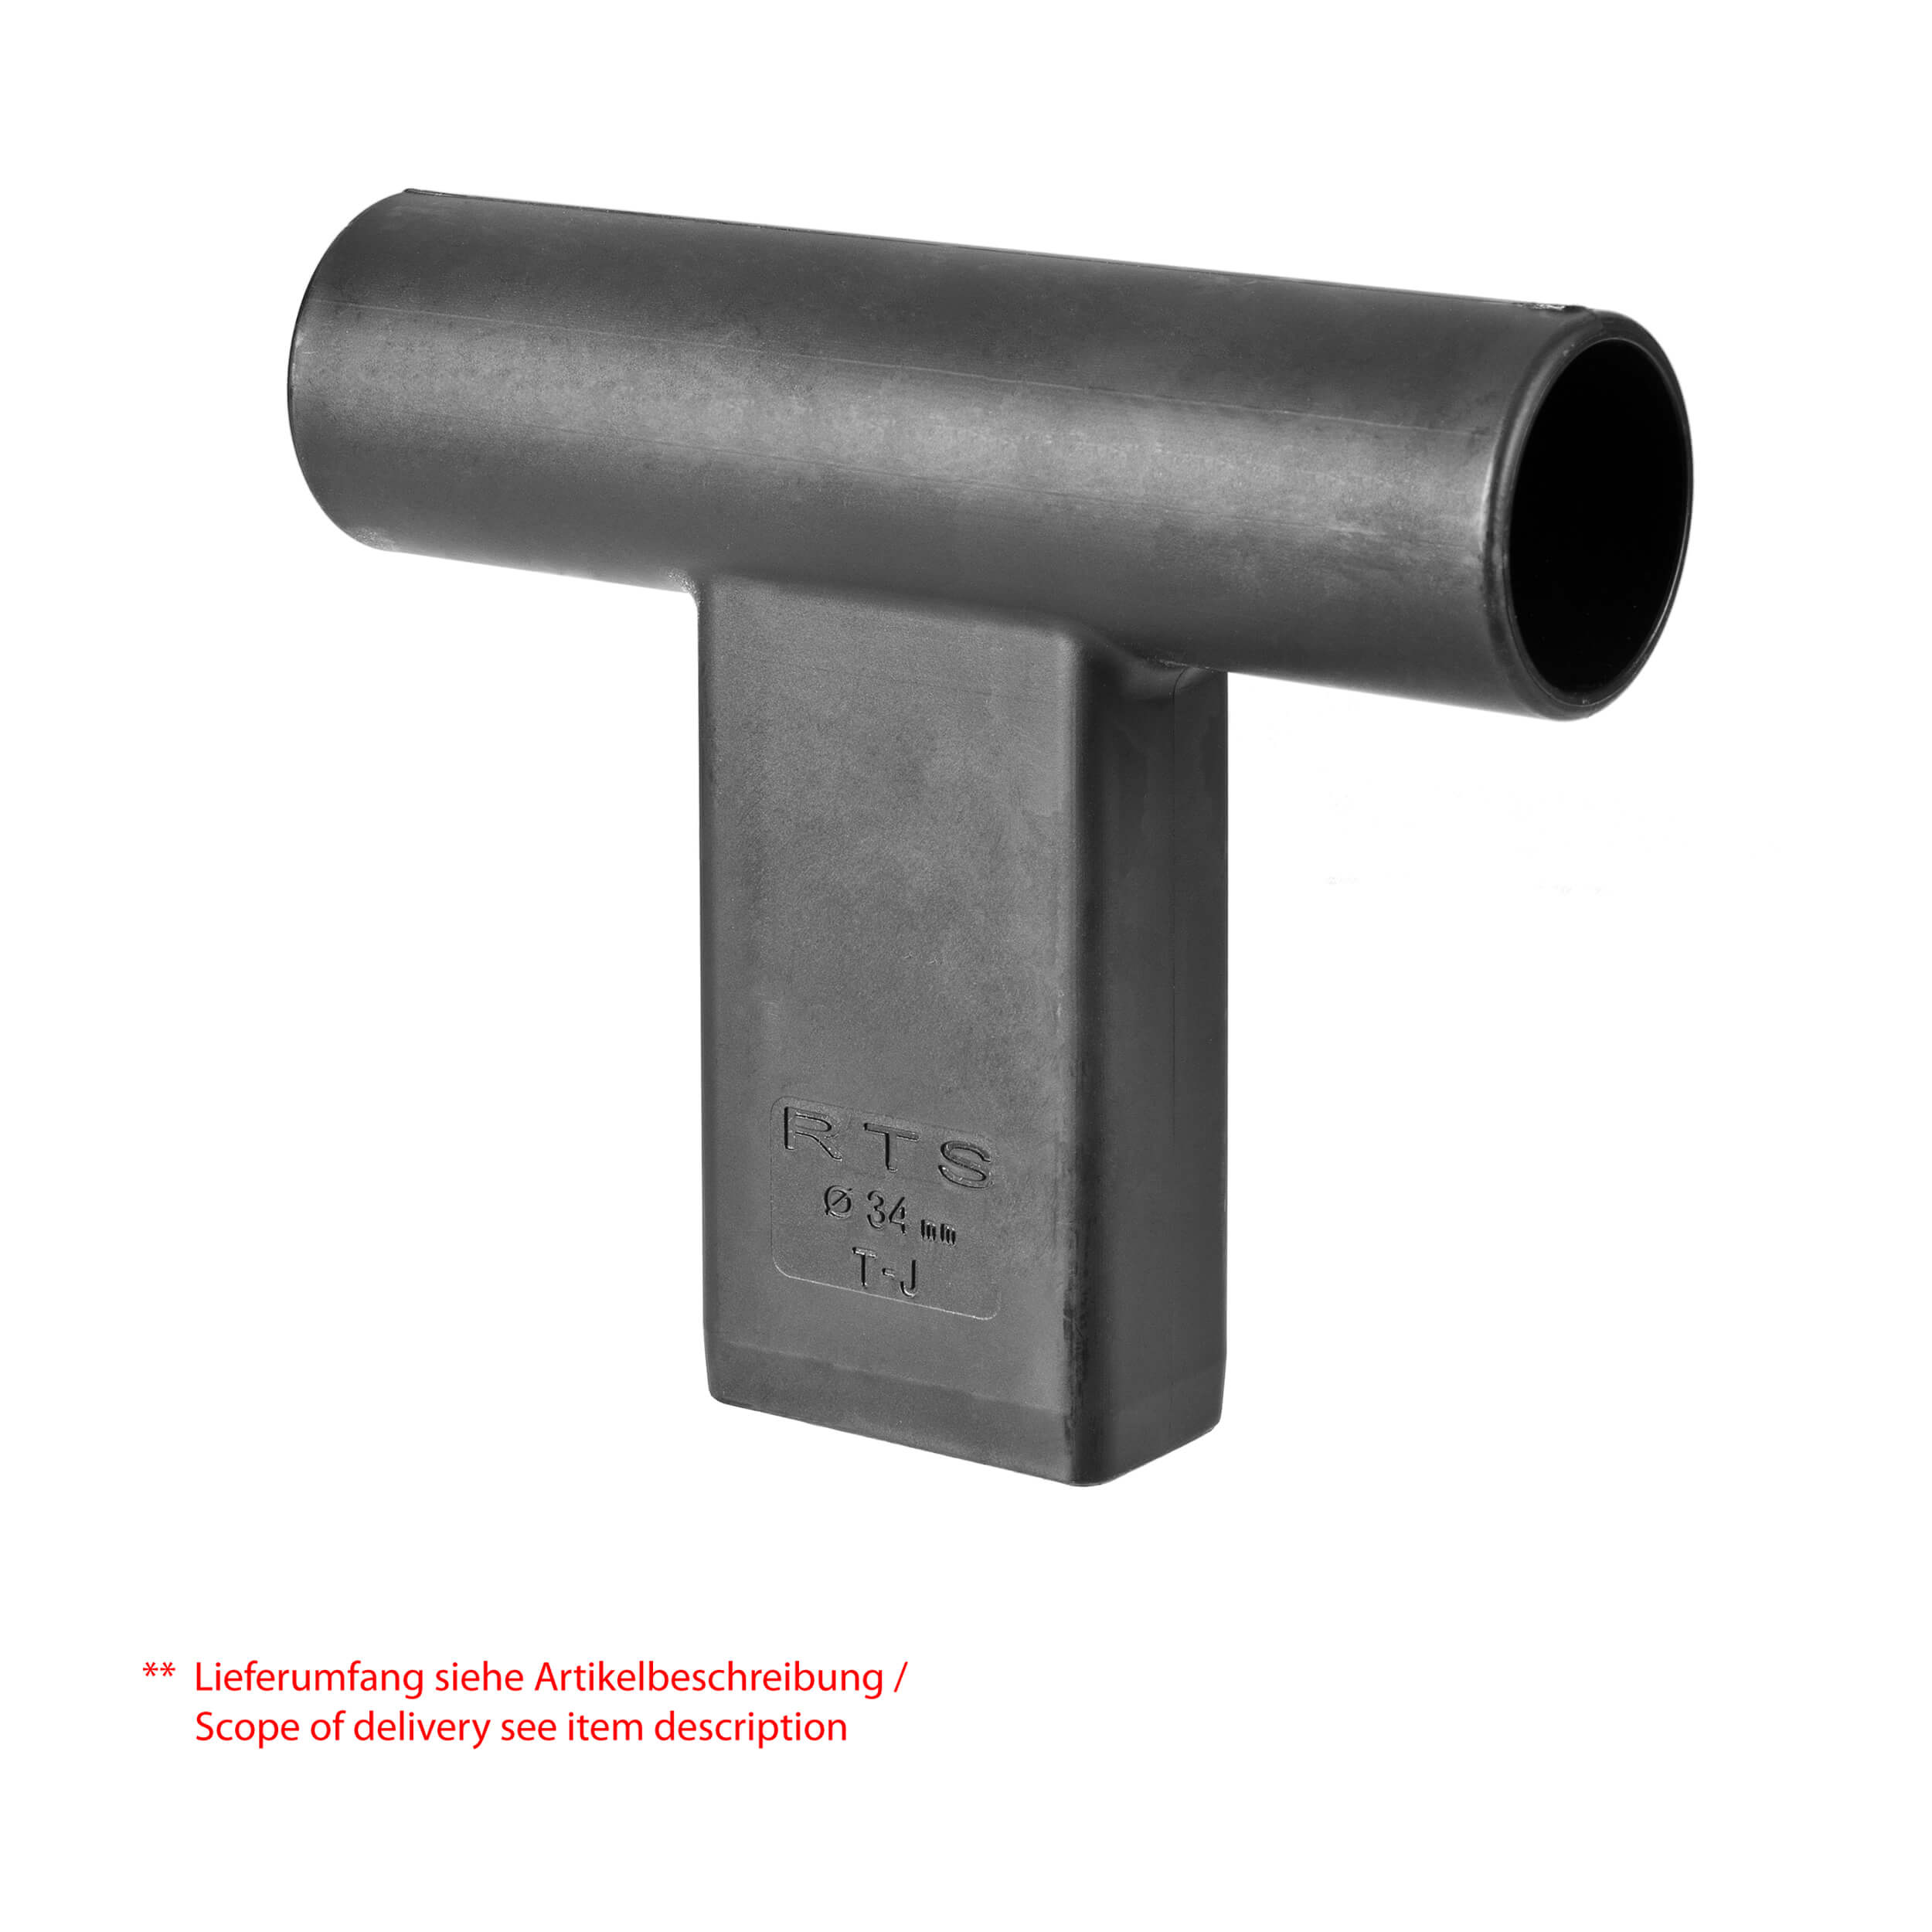 T Connector for Round Pole (32 mm diameter)